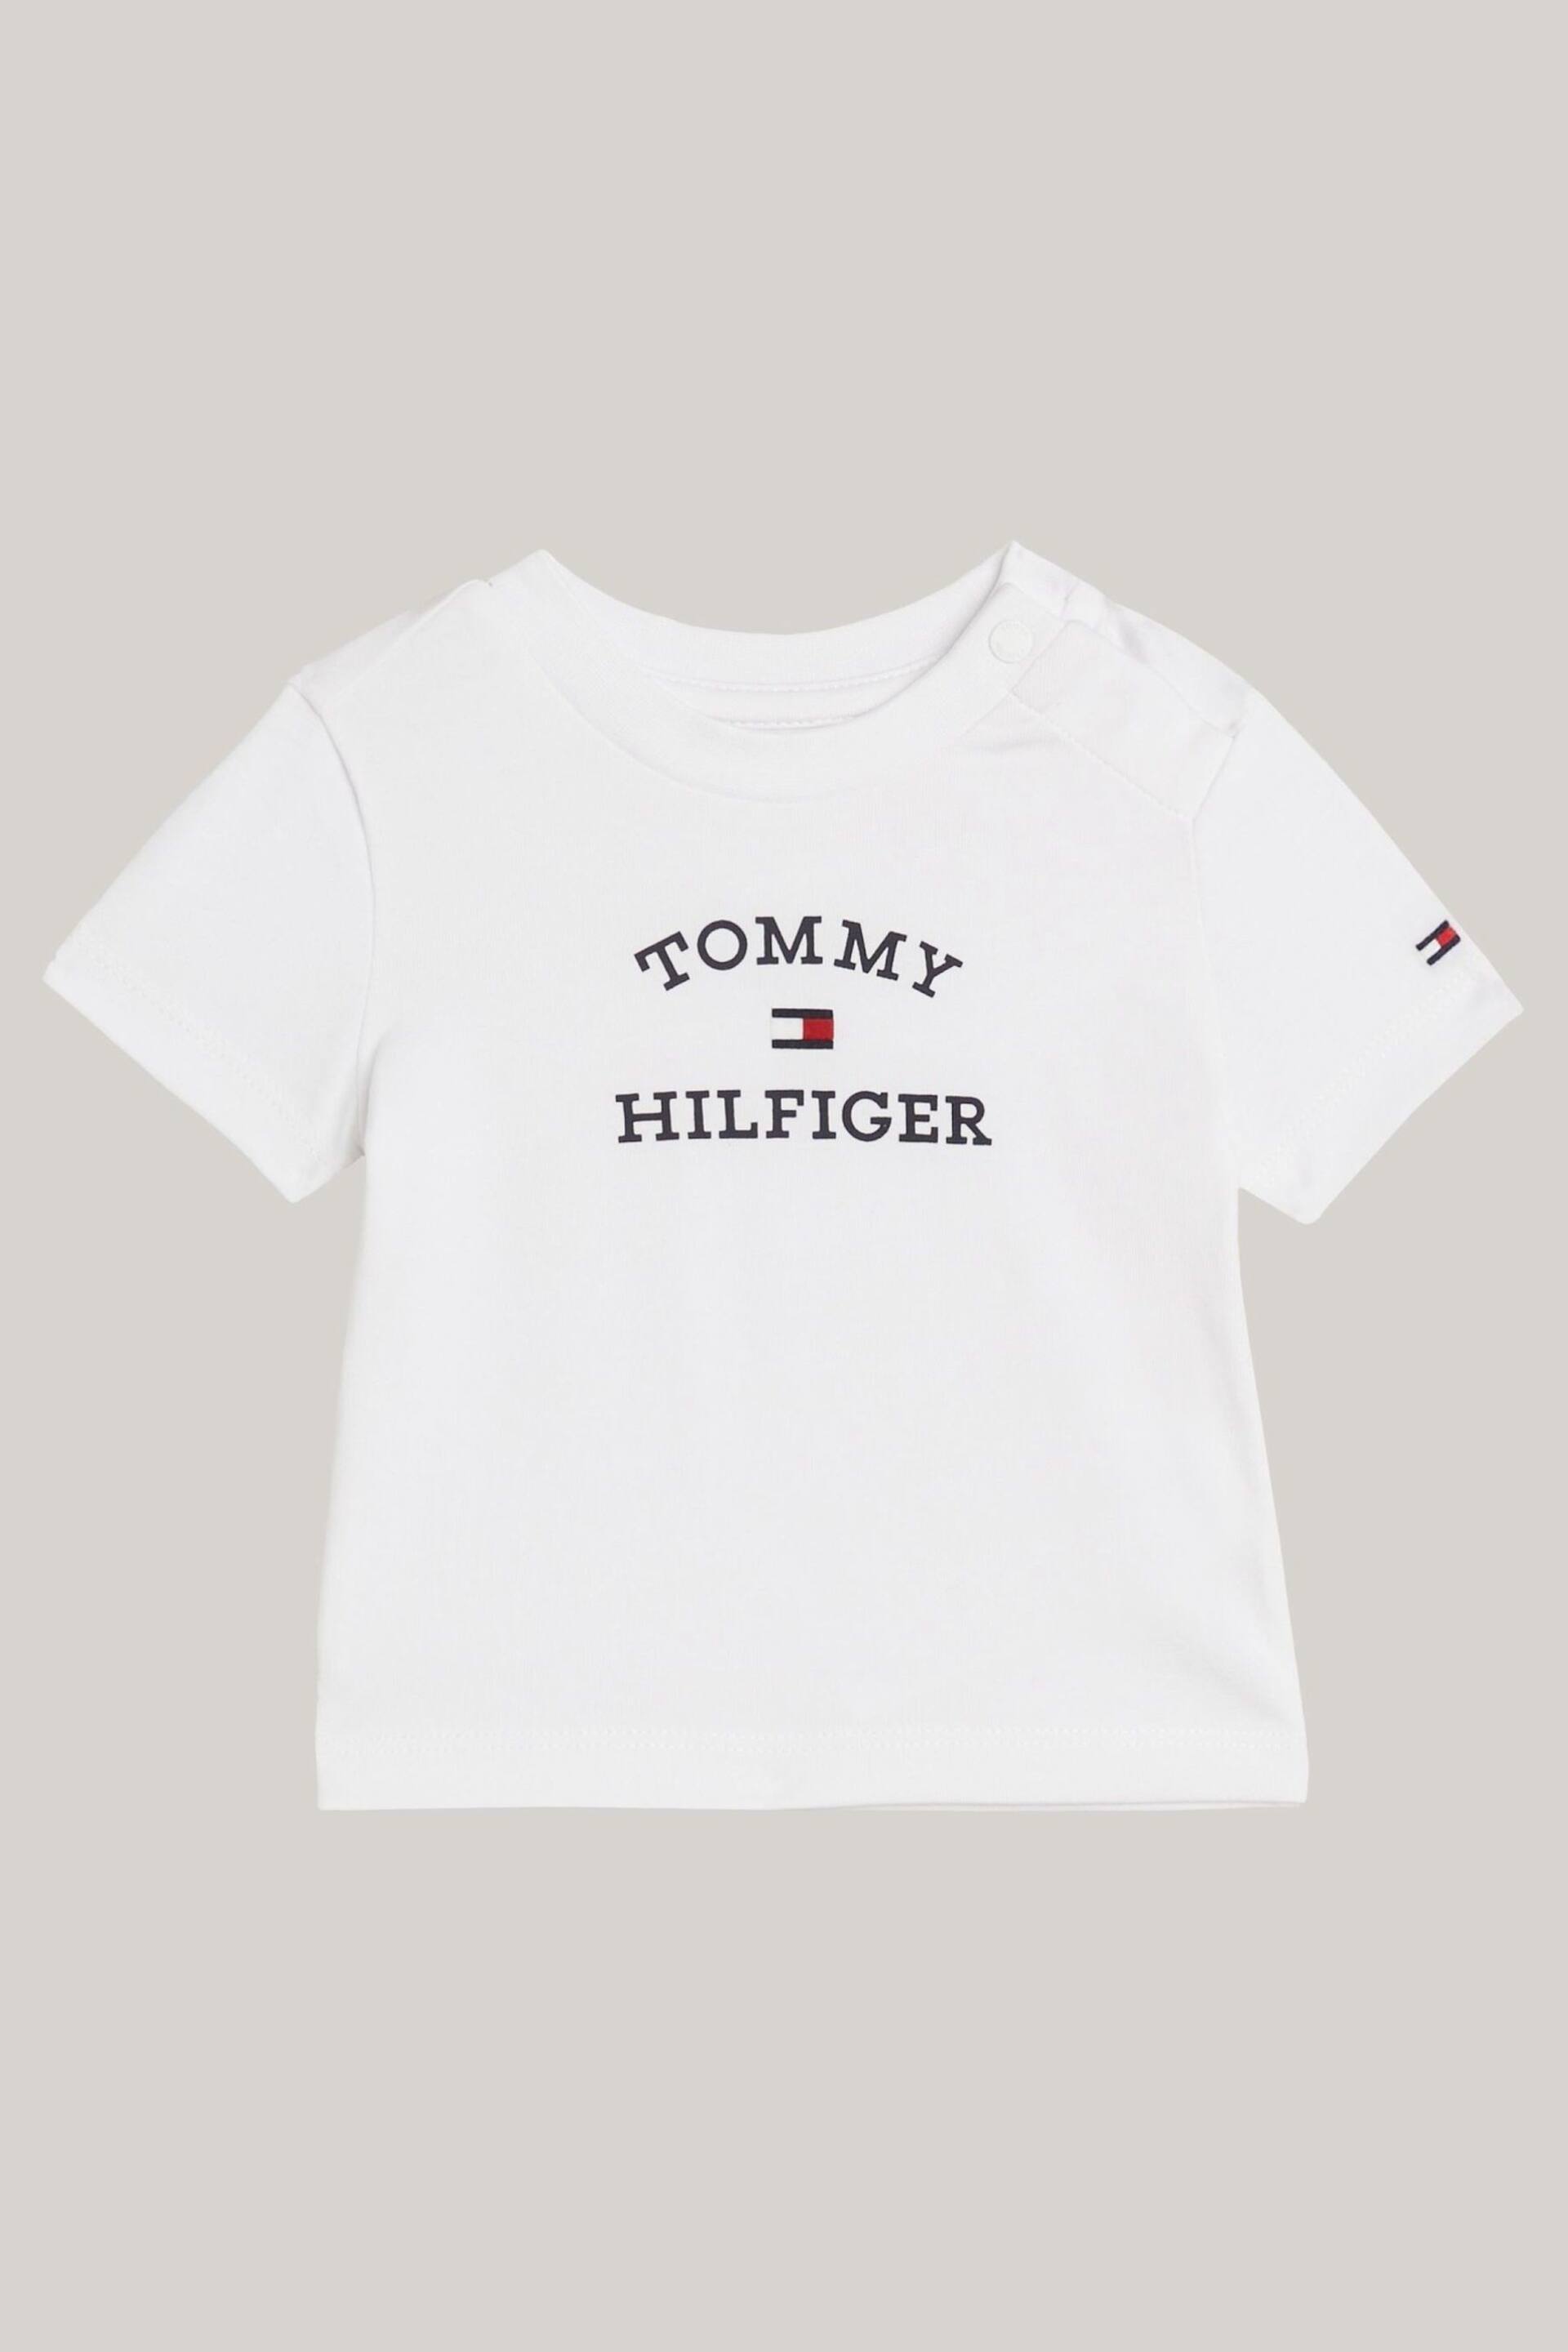 Tommy Hilfiger Baby Logo White T-Shirt - Image 1 of 3